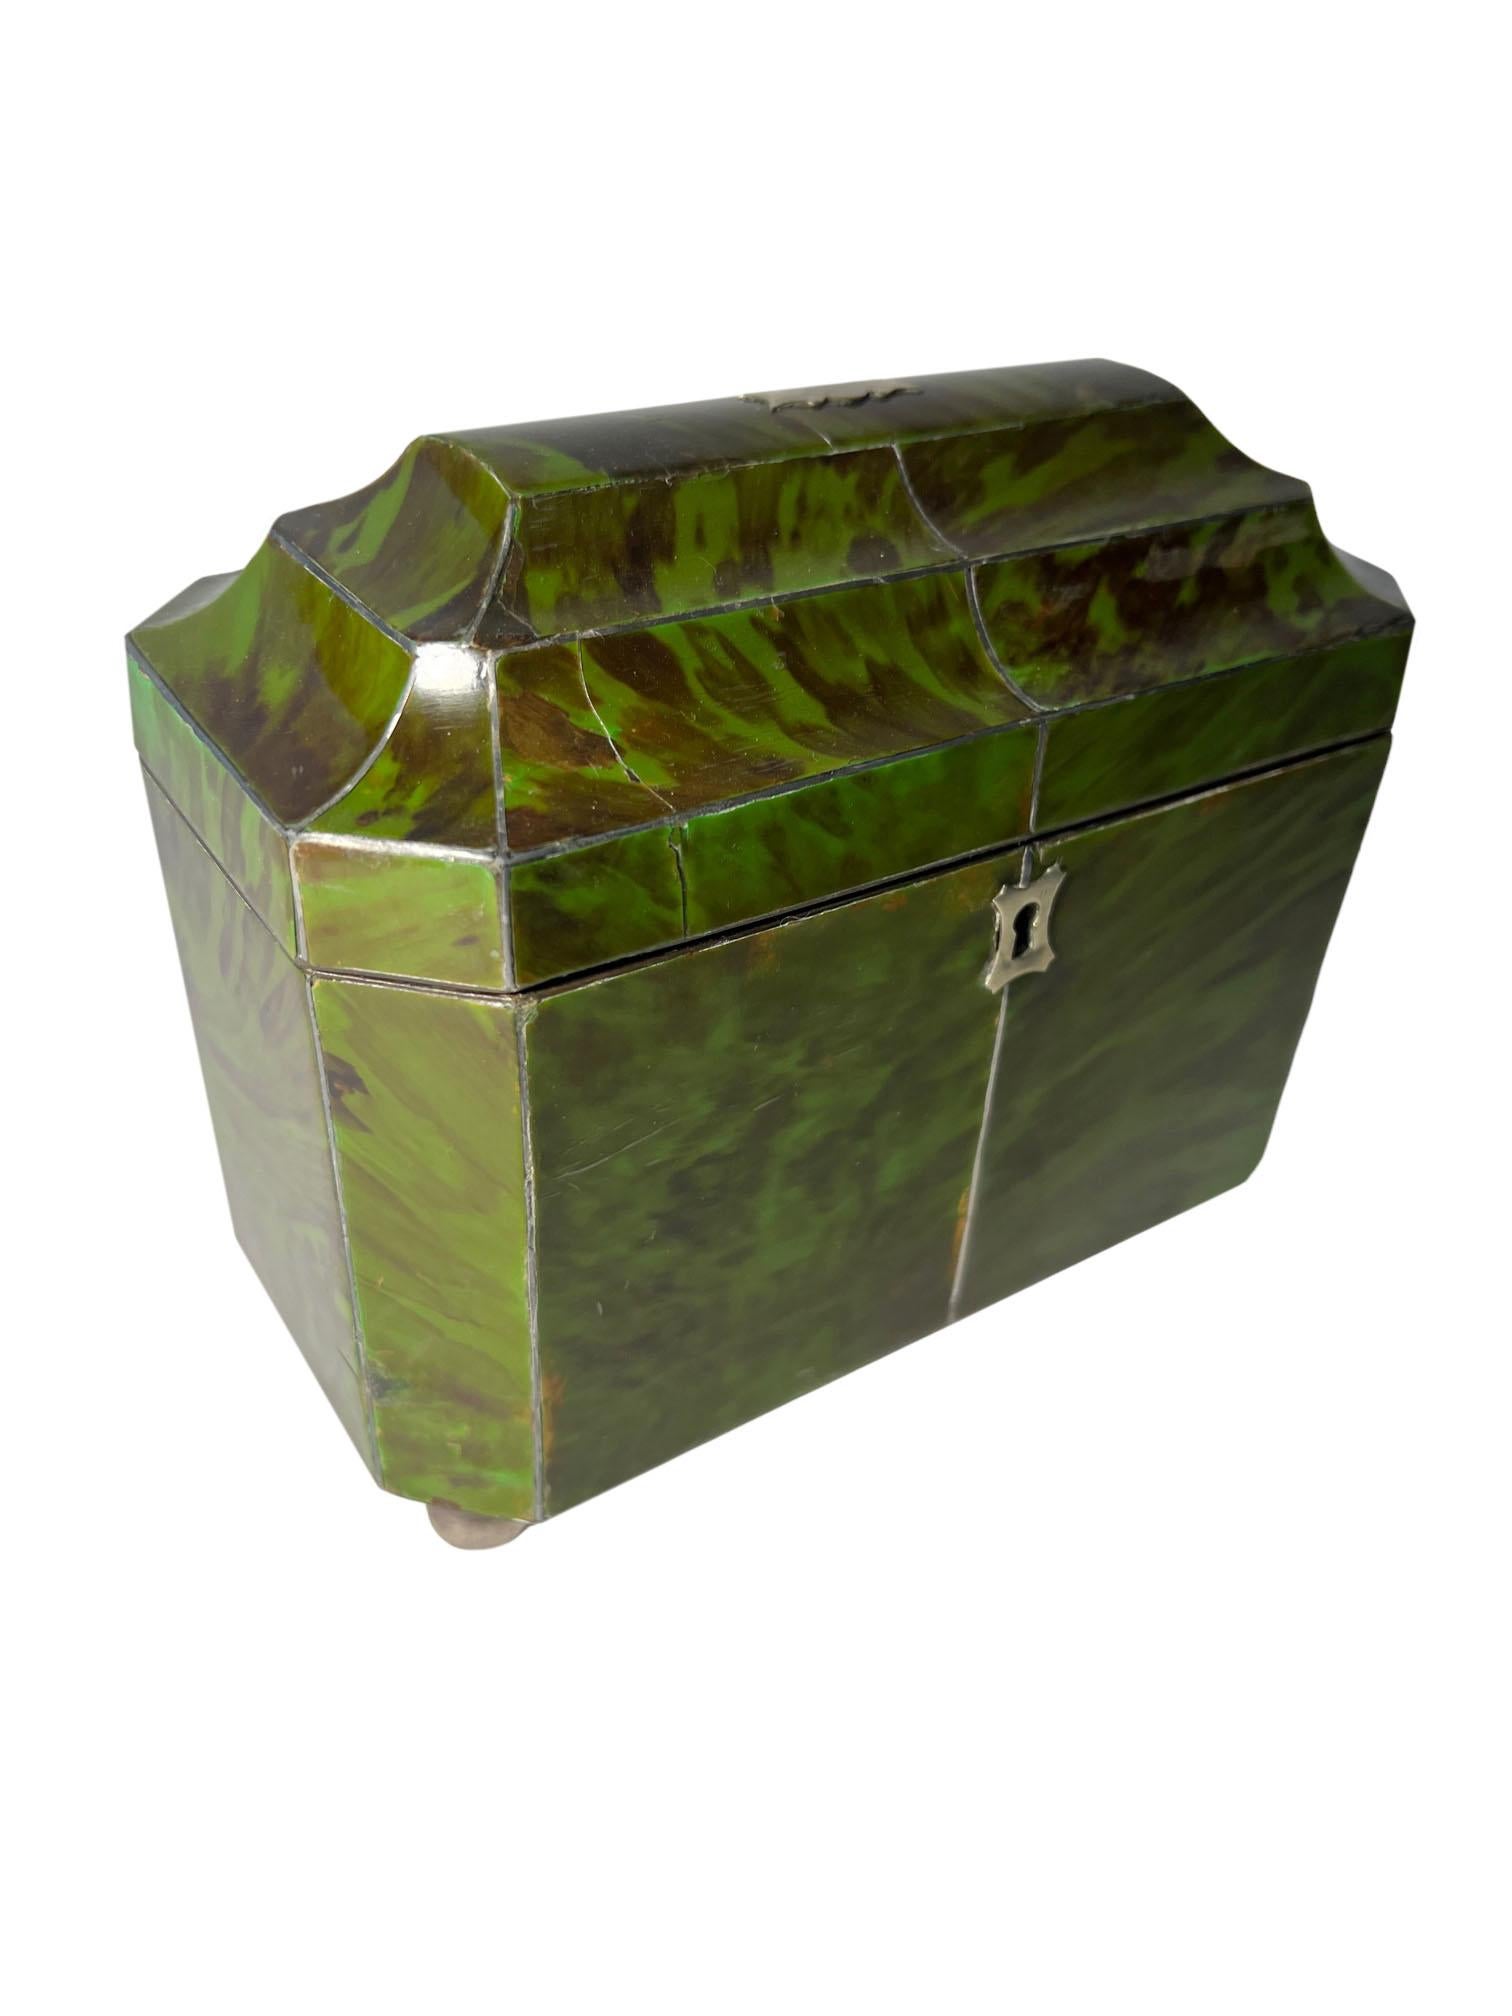 Green tortoiseshell tea caddy from England. With two interior covers raised on four silver ball feet. Circa 1870.